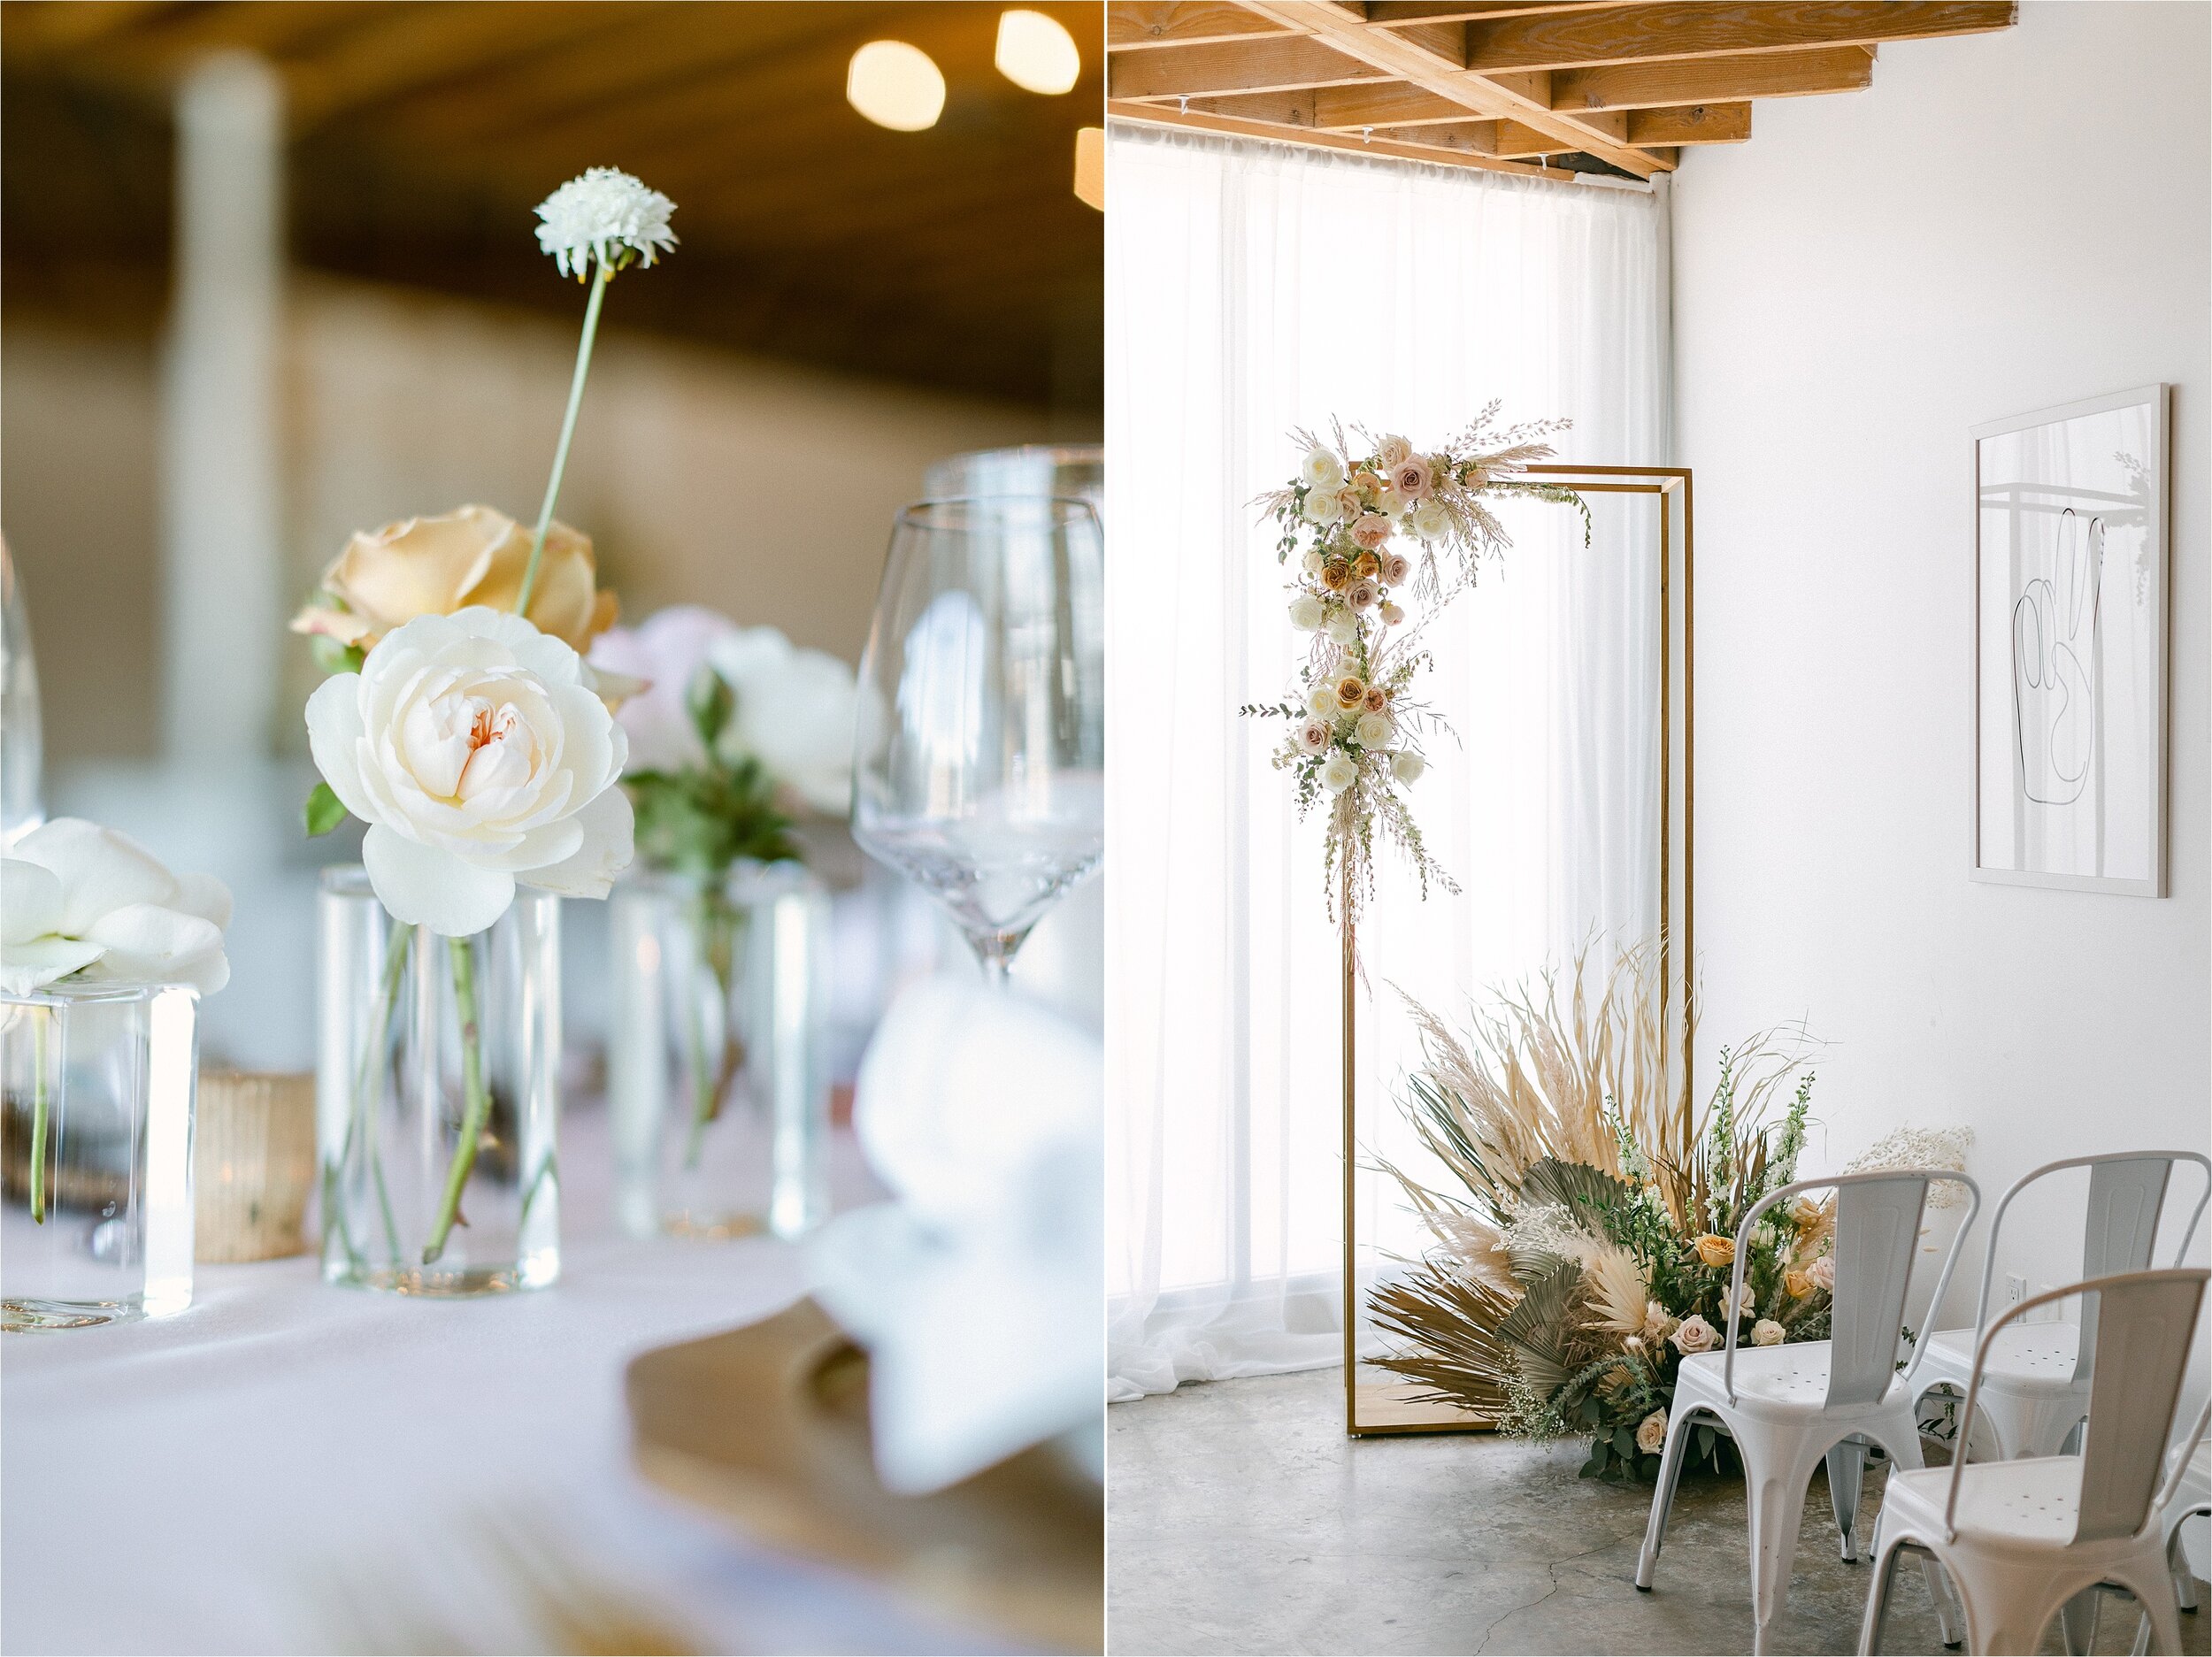 White and peach single flowers in bud vase, showcasing minimalistic reception tablescape at neutral toned micro wedding